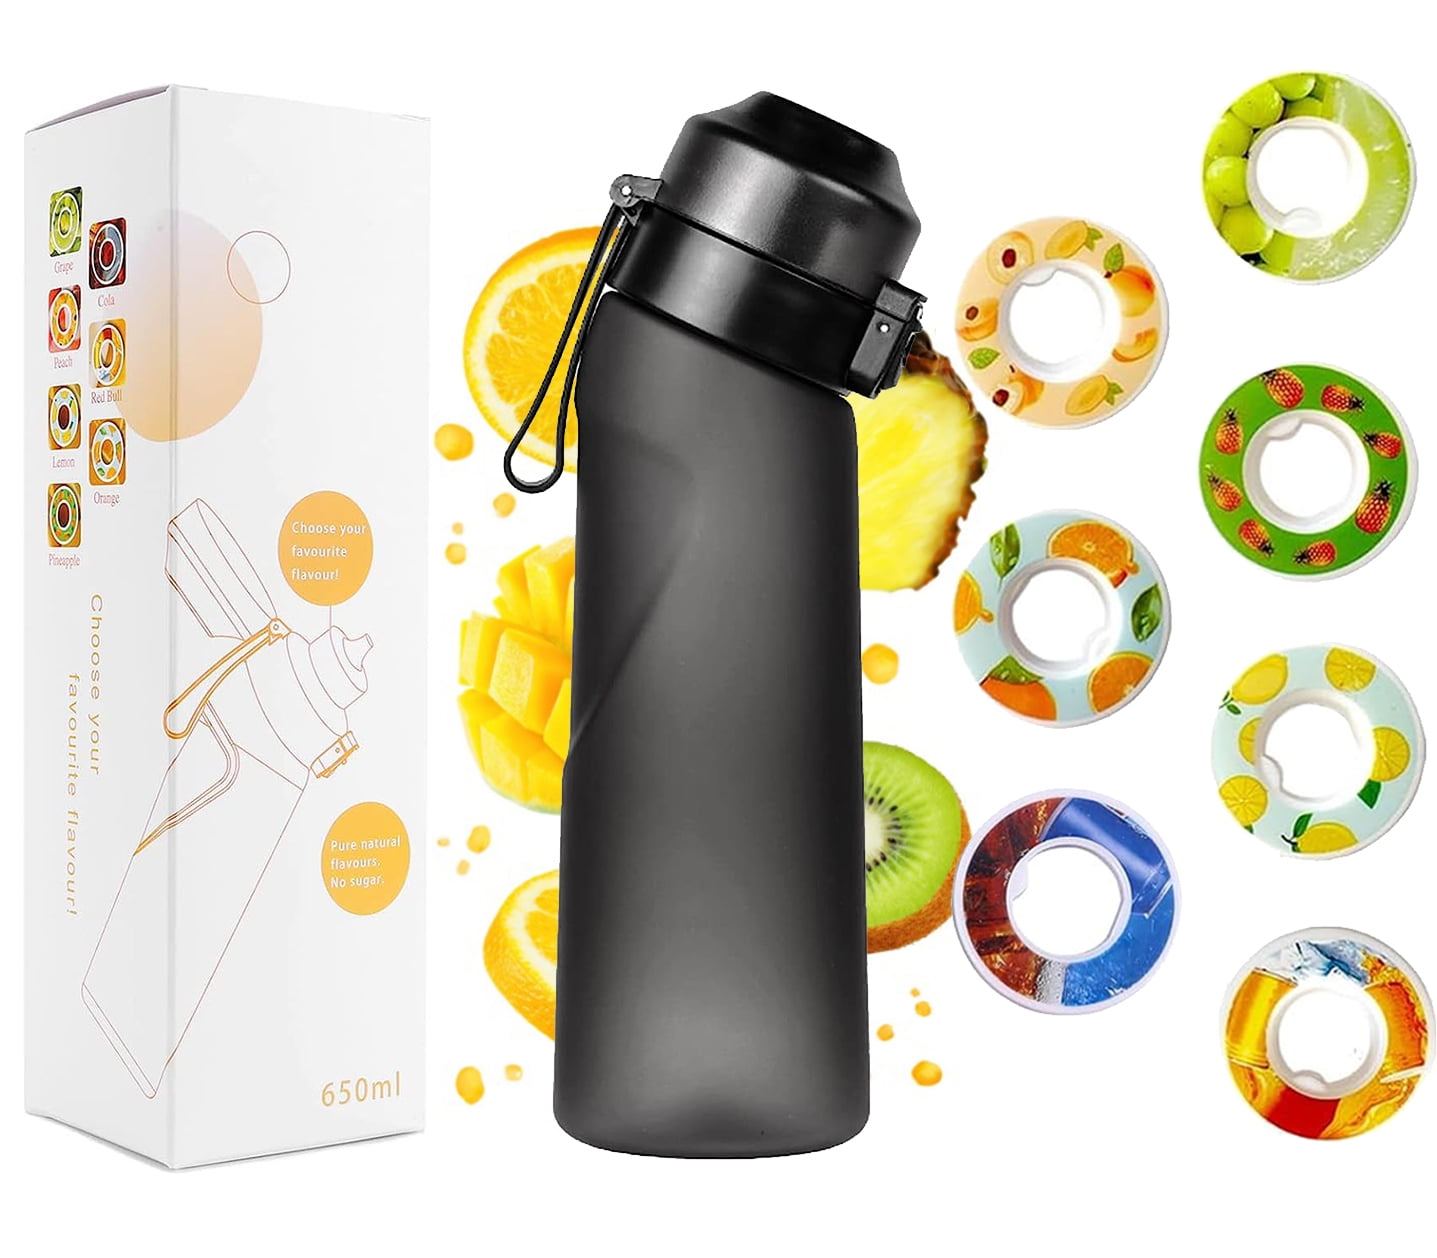  Flavor Air Water Bottle, Air Water Bottle with 7 Flavor Pods,  750ML Air Drinking Water Bottle Starter Set with Flavour Capsules,0% Sugar  Water Cup BPA Free, Suitable for Outdoor Sport (Blue) 